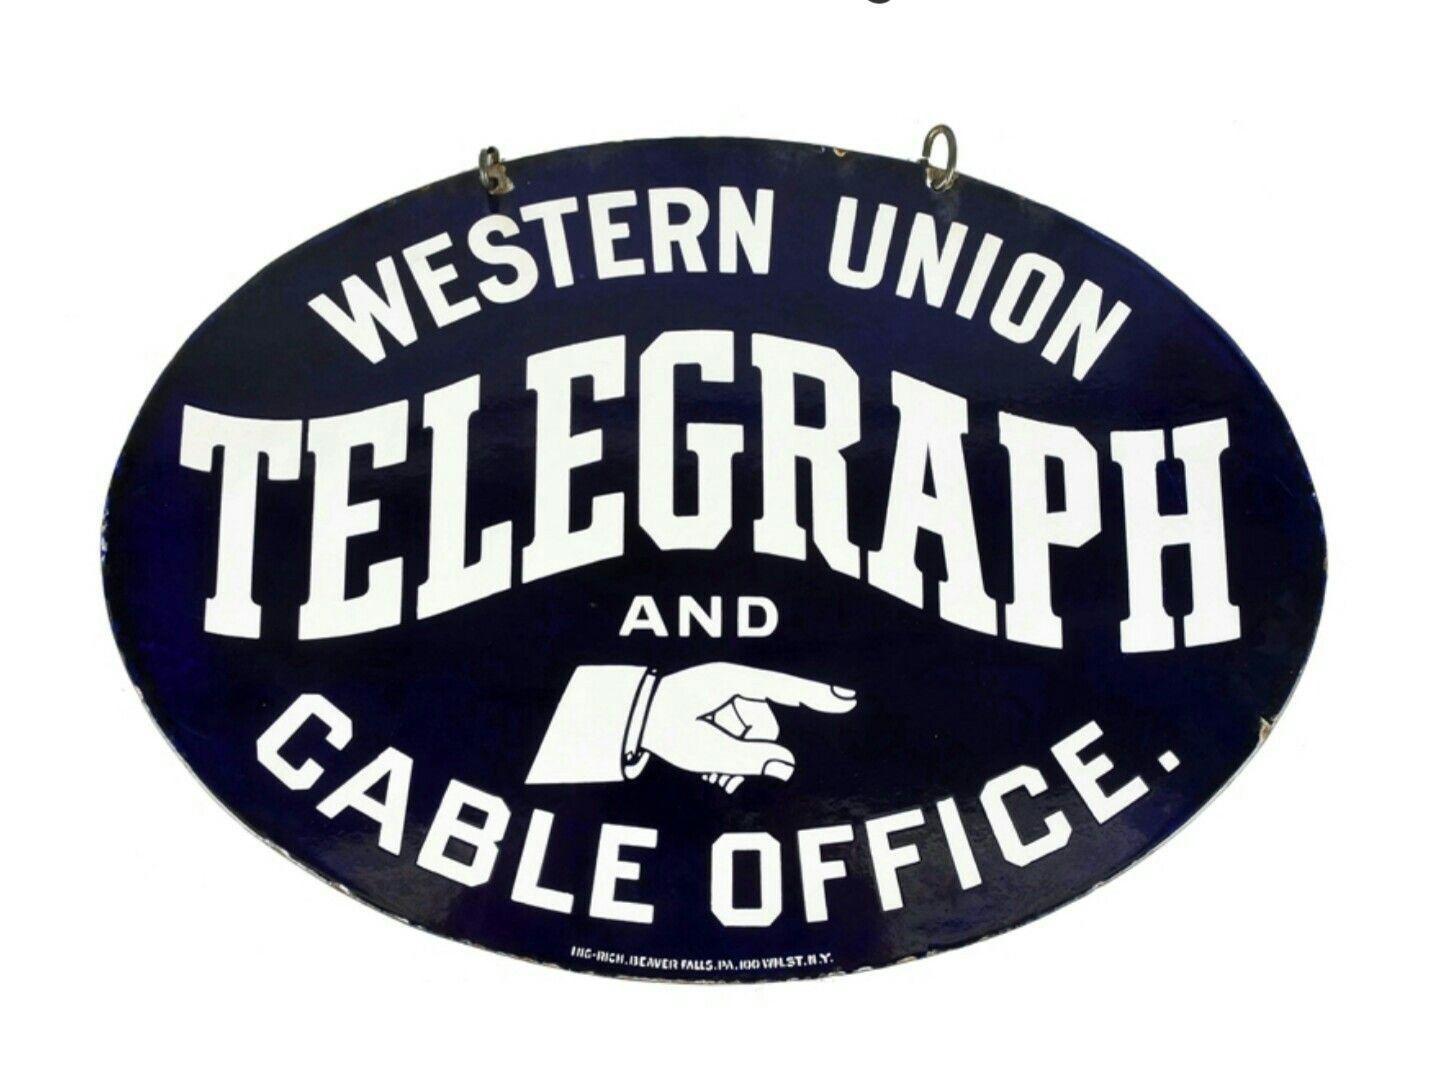 Old Western Union Logo - Rare Original Western Union Telegraph and Cable Office Porcelain ...